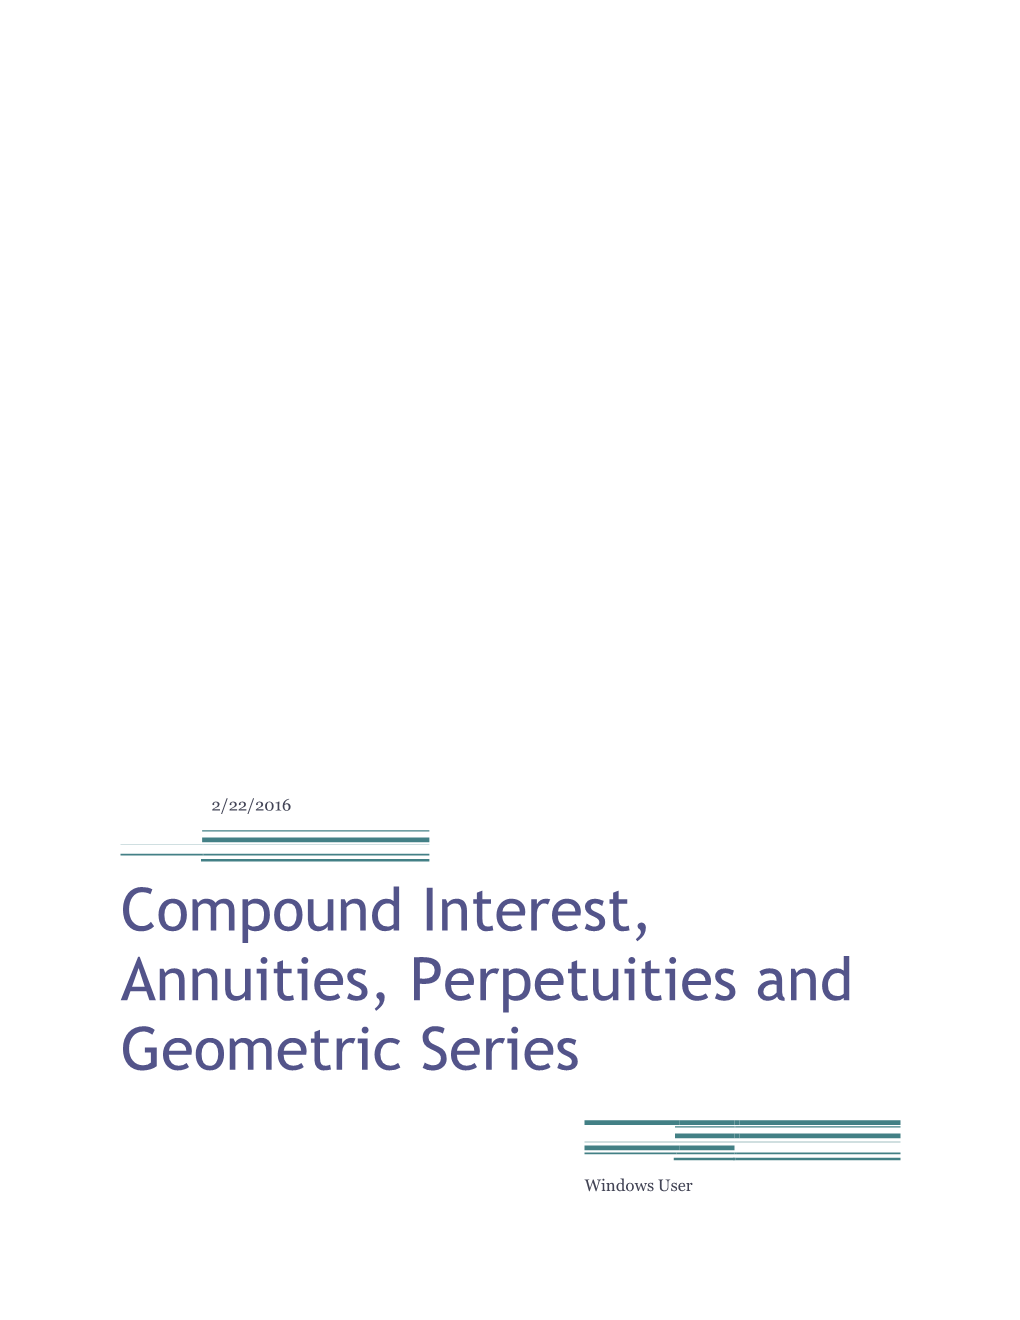 Compound Interest, Annuities, Perpetuities and Geometric Series